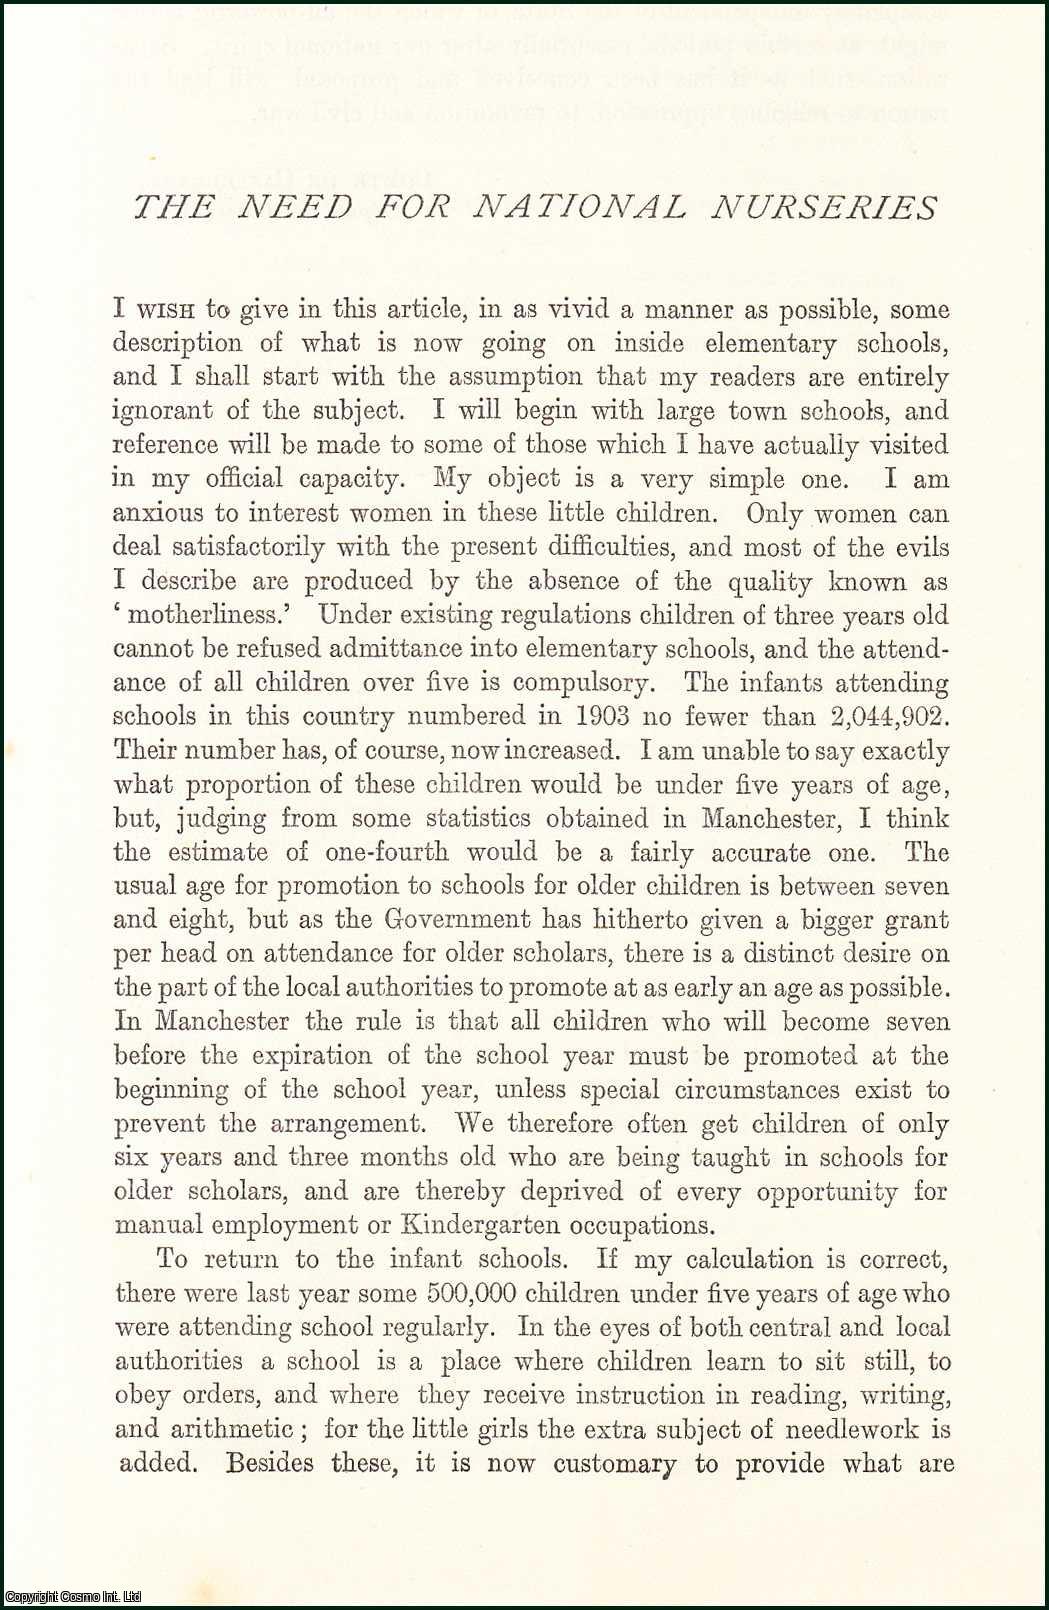 K. Bathurst - The Need For National Nurseries. An original article from the Nineteenth Century Magazine, 1905.